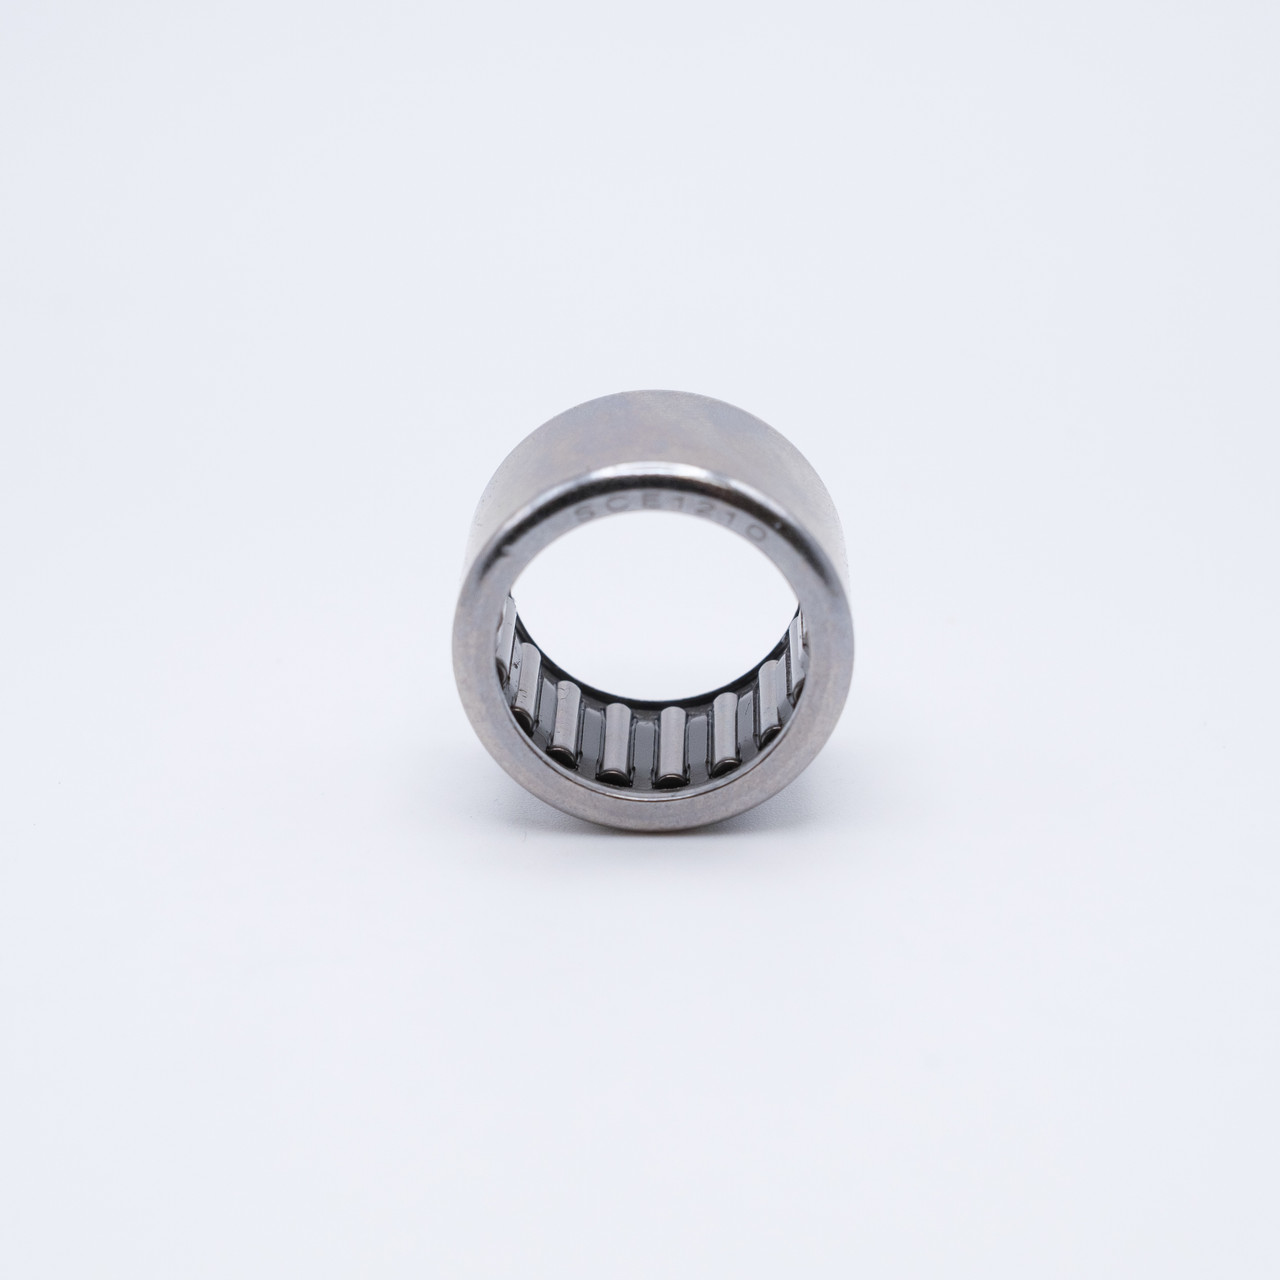 SCE2620 Needle Roller Bearing 1-5/8x2x1-1/4 Front View